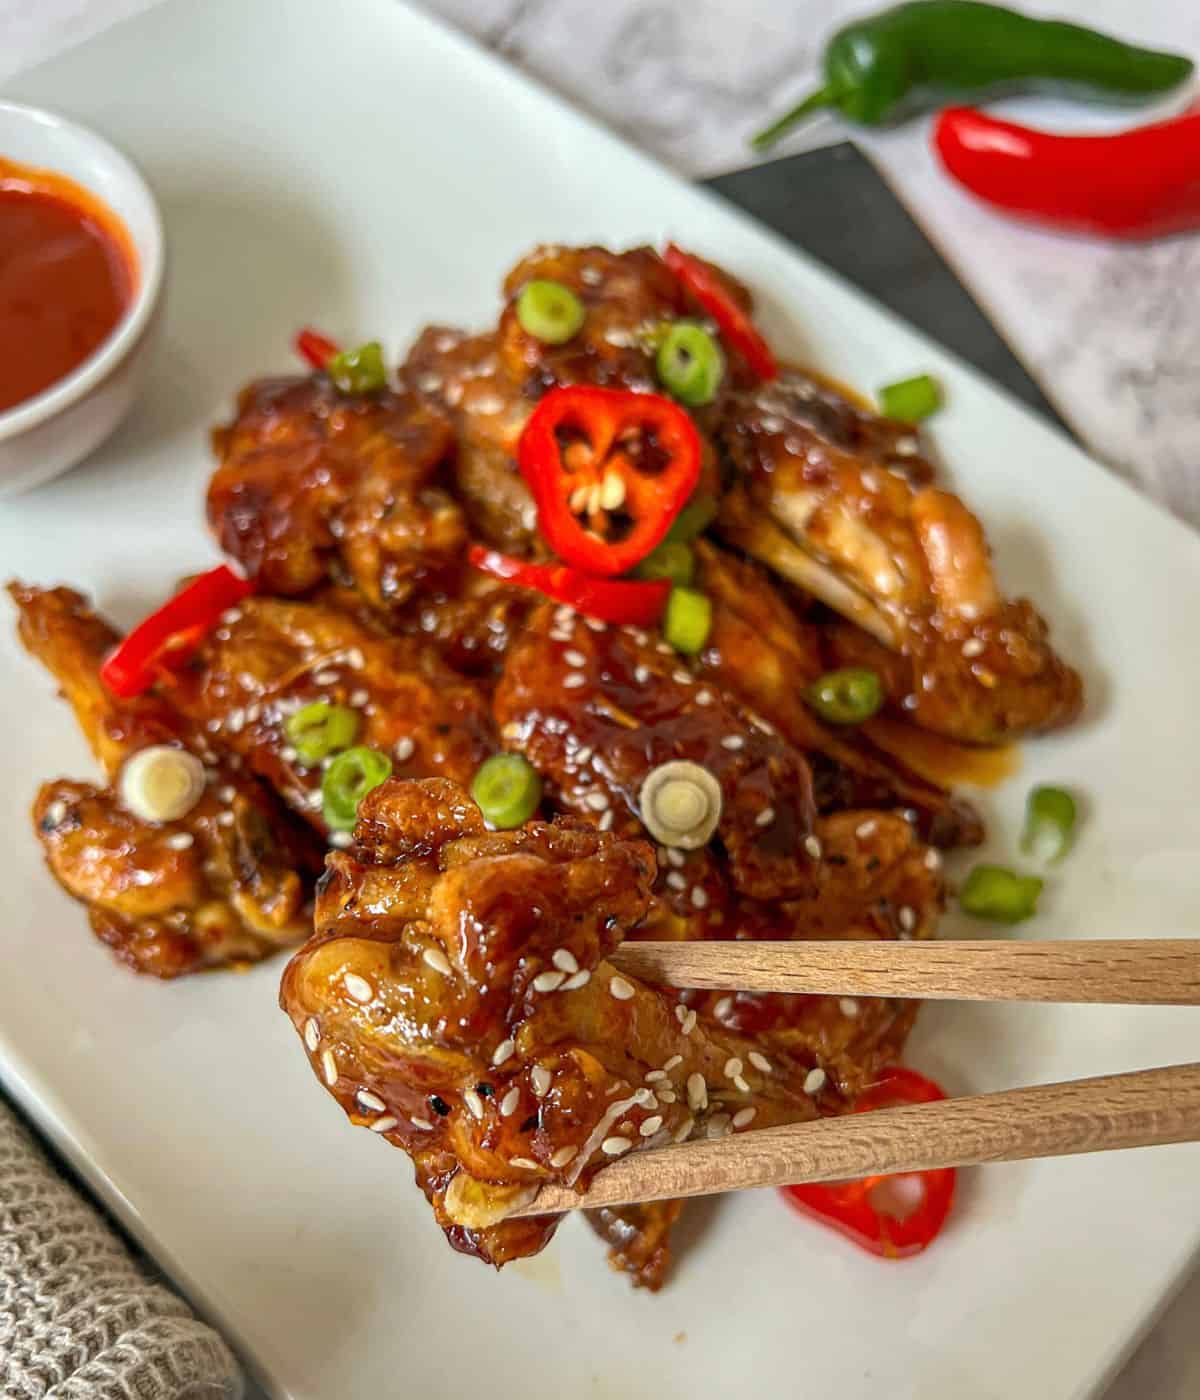 Sticky chicken wings garnished with sesame seeds are being picked up with chopsticks.